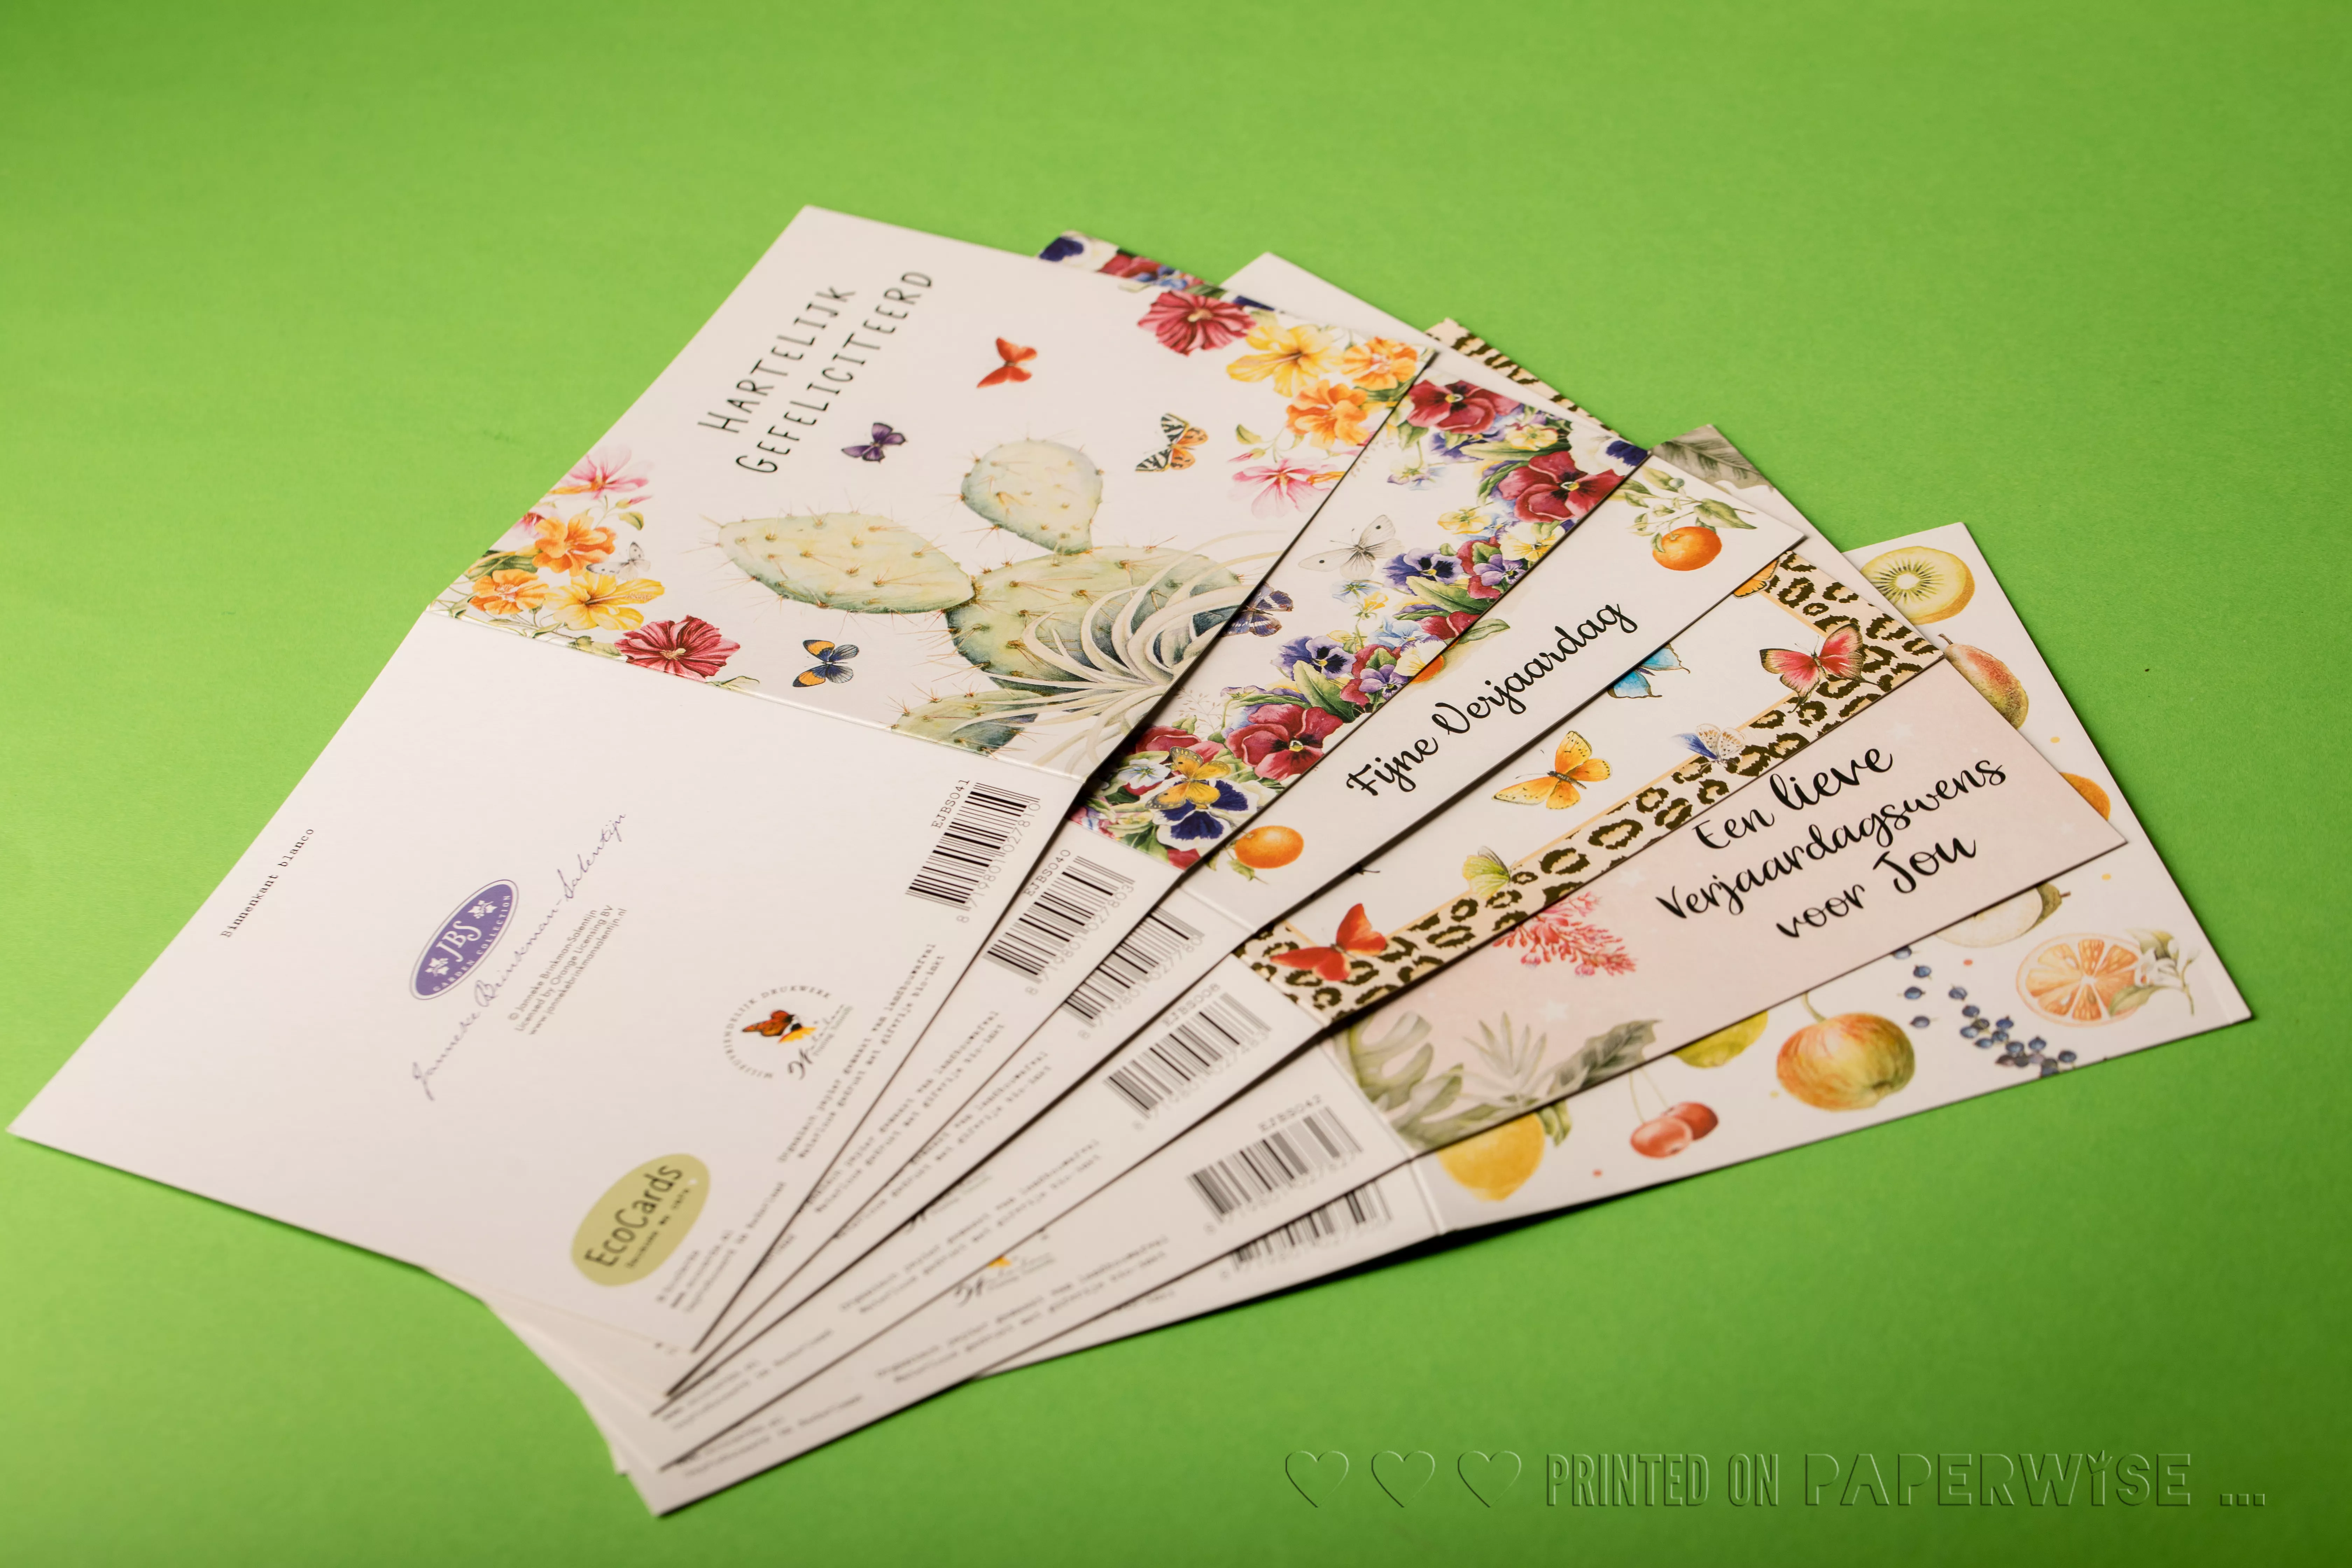 PaperWise eco friendly paper board agri waste sustainable postcards Ecocards